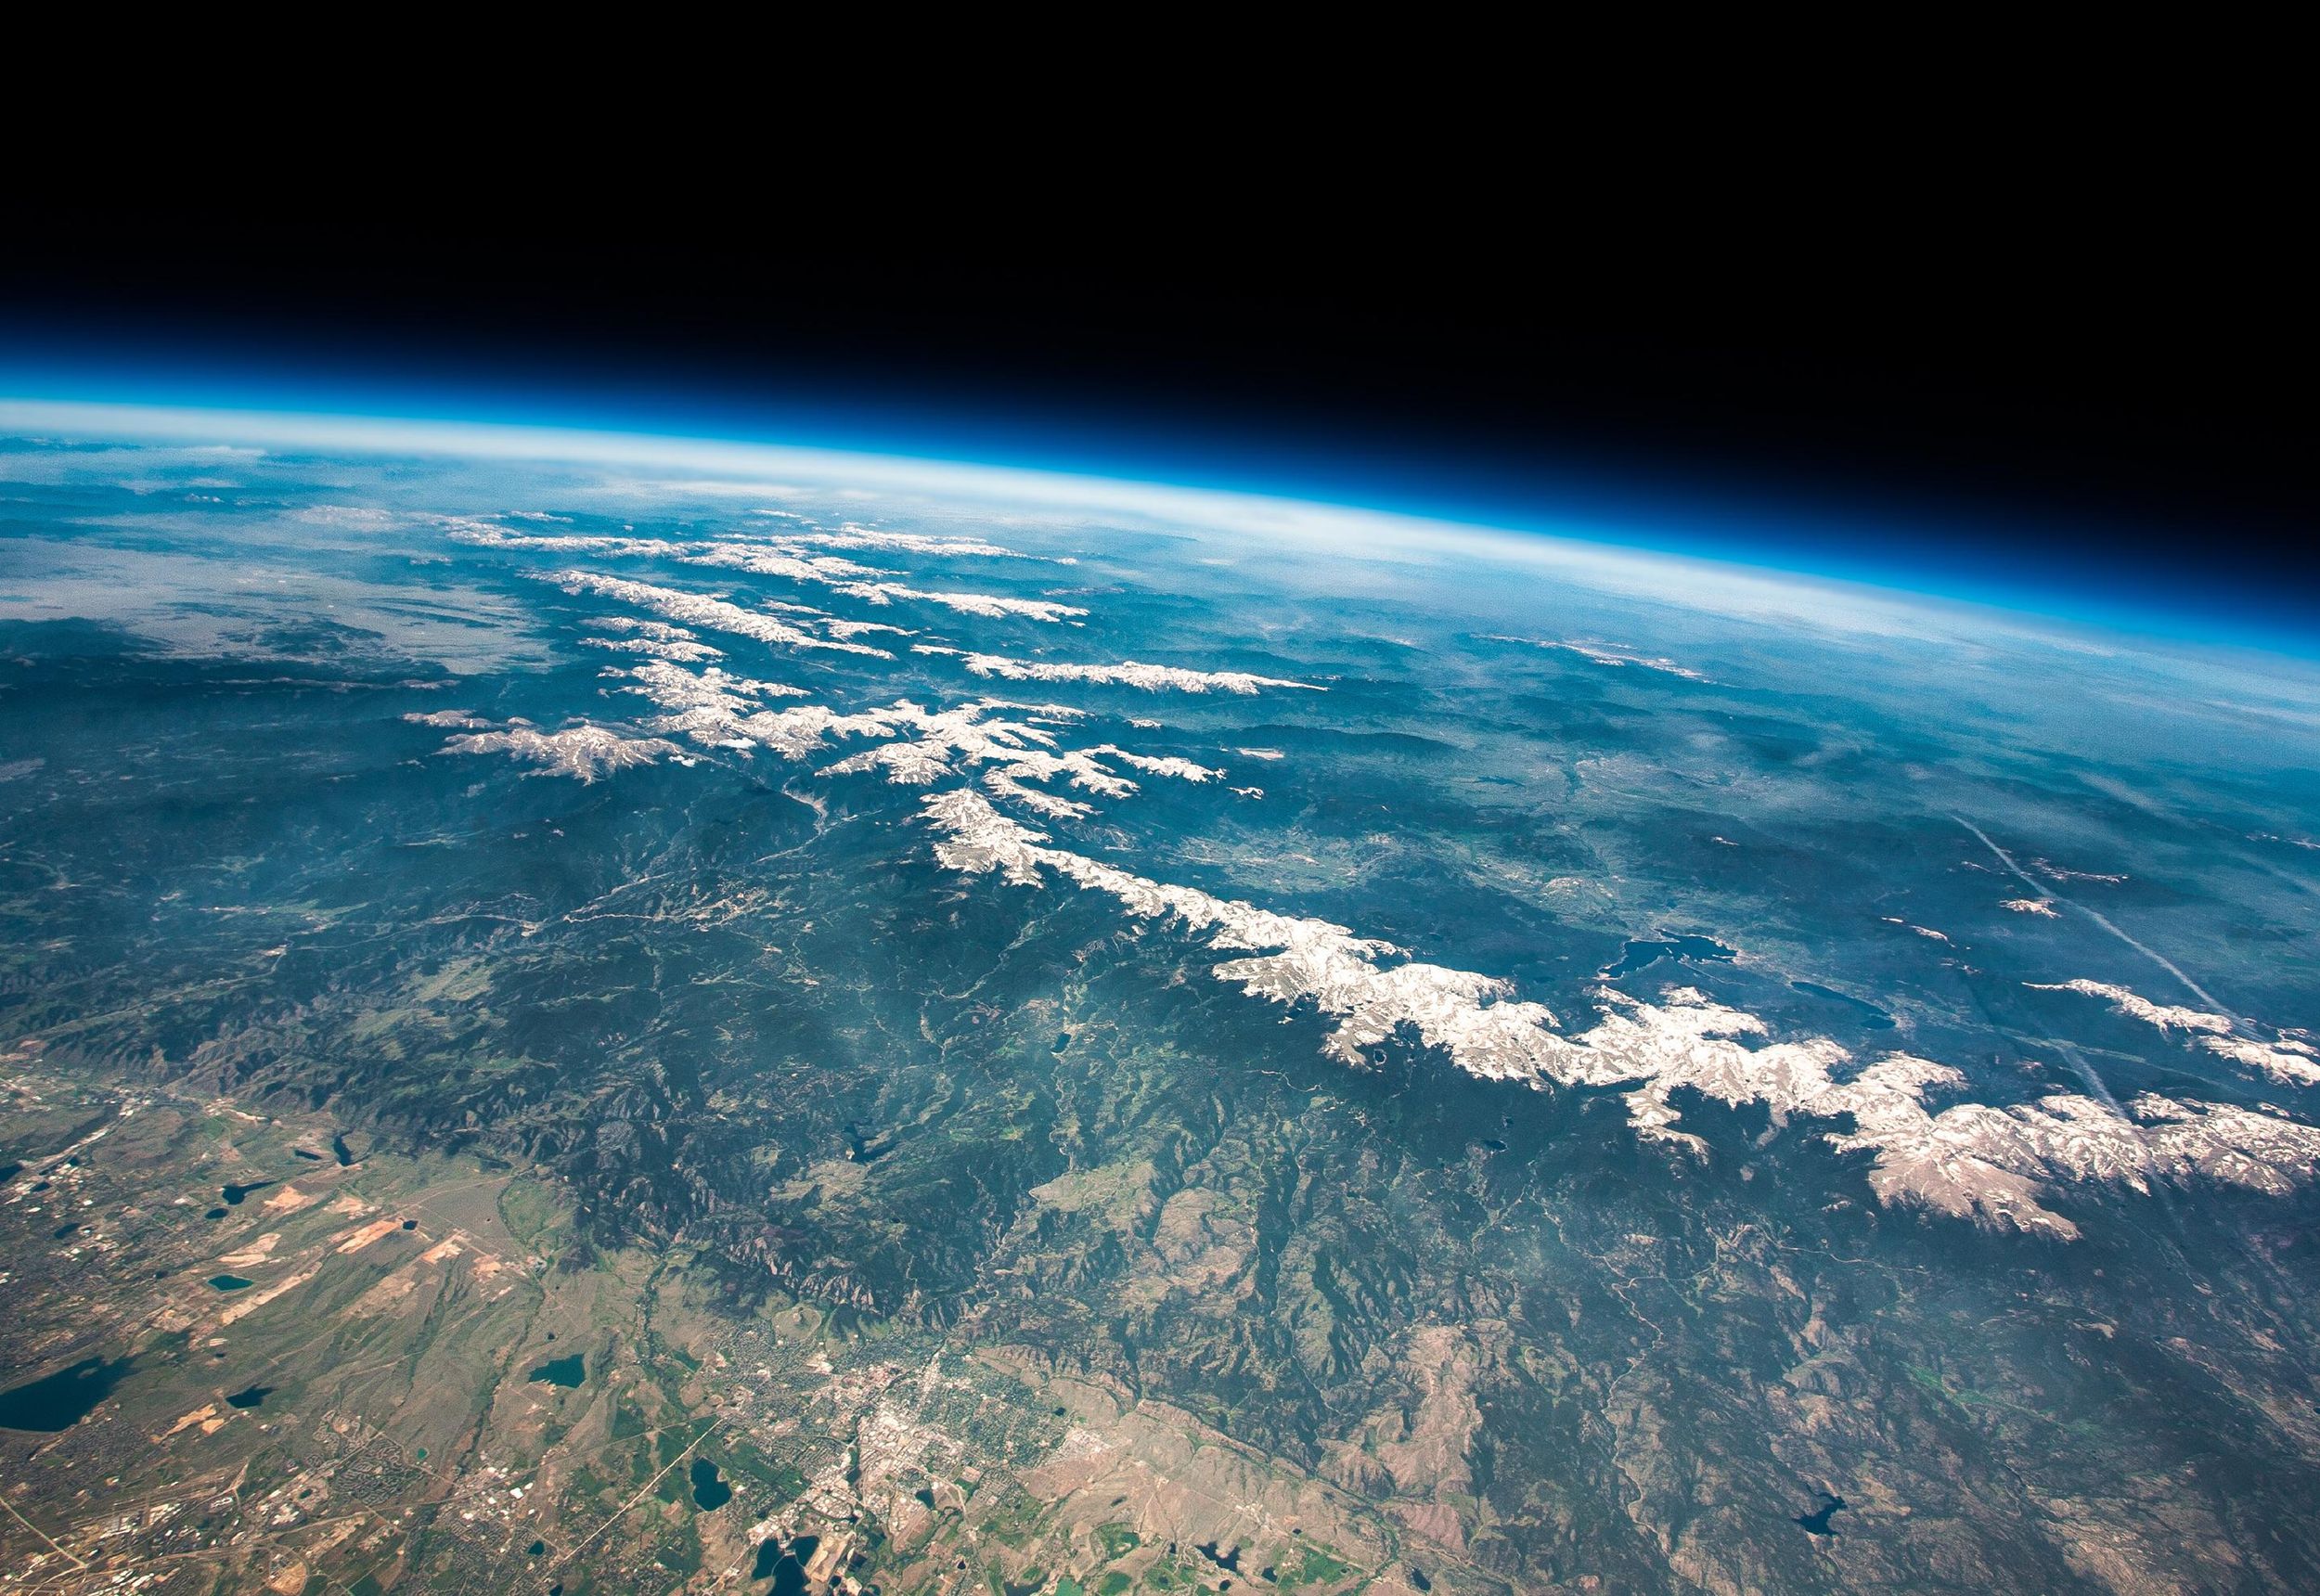 Stratospheric view of the Earth